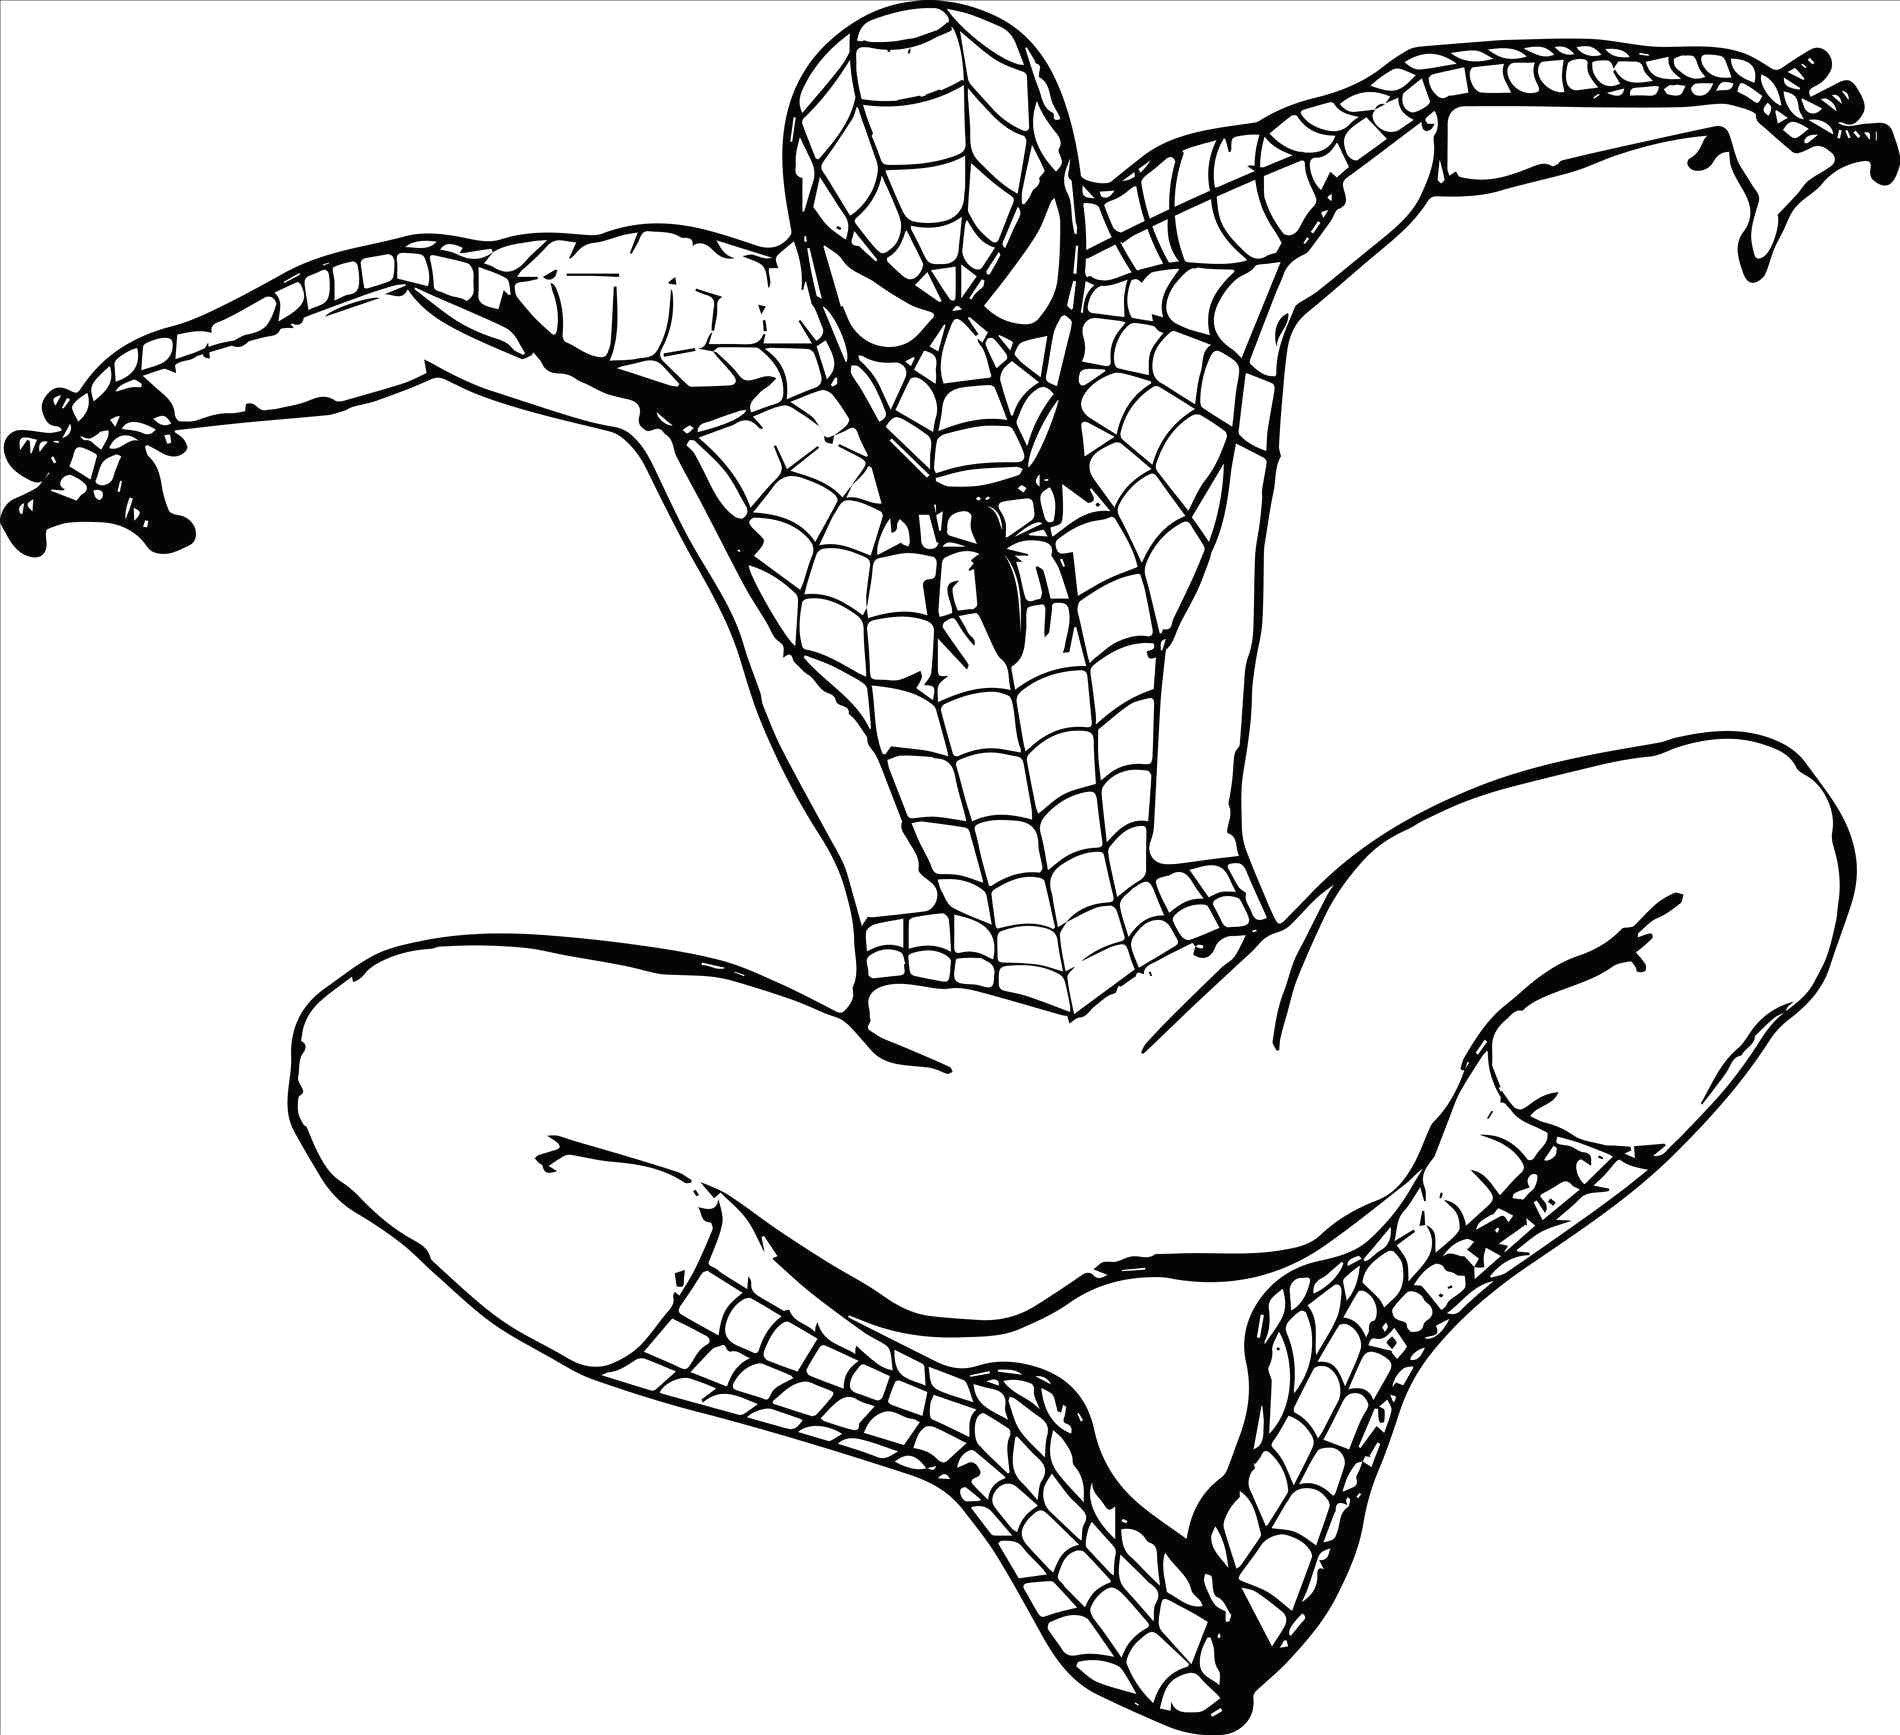 Drawing A Cartoon Spiderman Superheroes Easy to Draw Spiderman Coloring Pages Luxury 0 0d